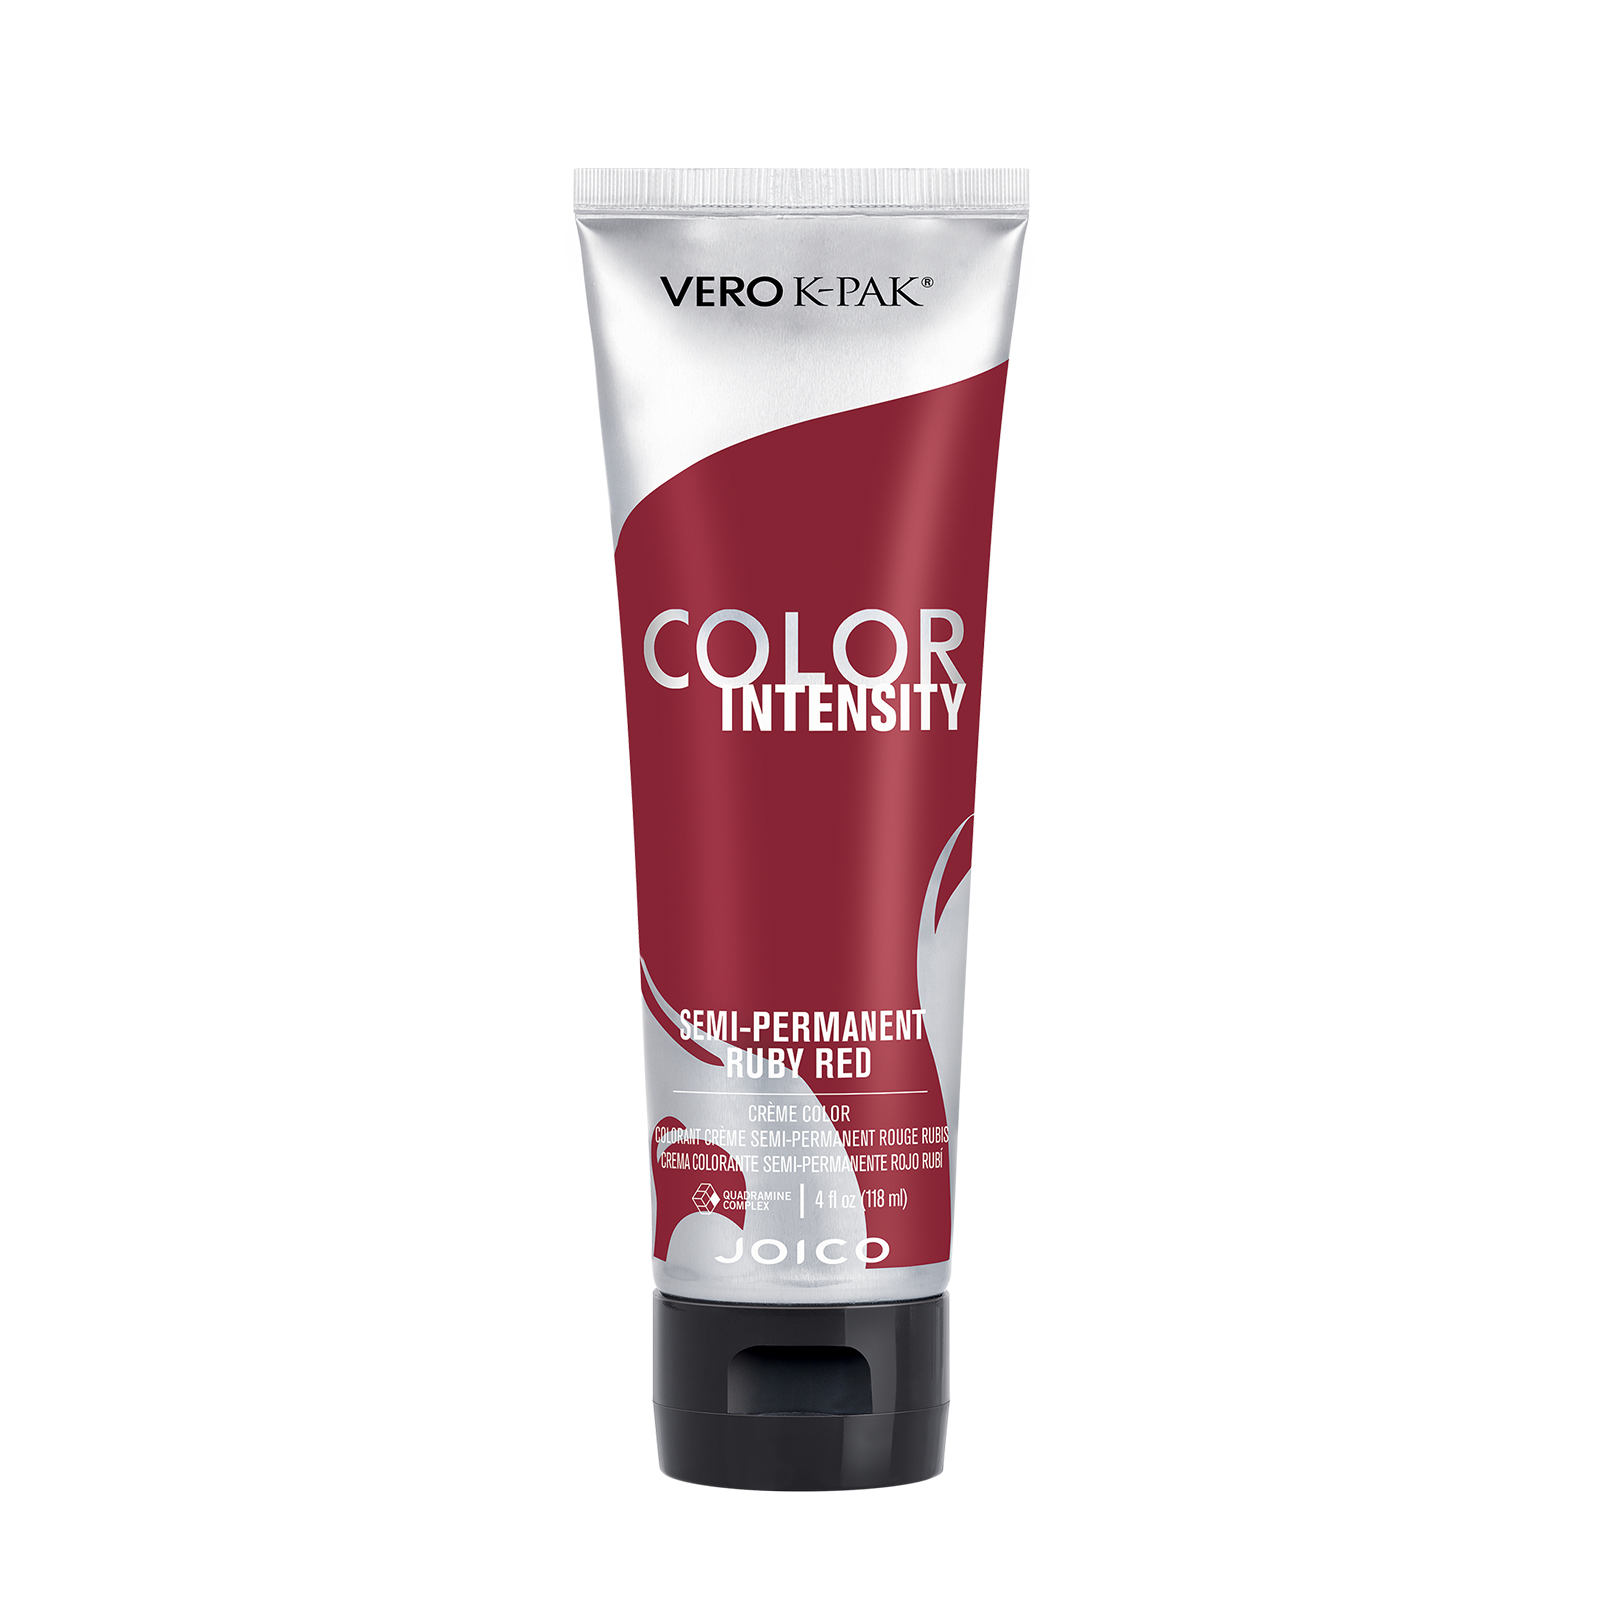 Joico Color Intensity Semi Permanent Ruby Red 118ml - Beautopia Hair & Beauty